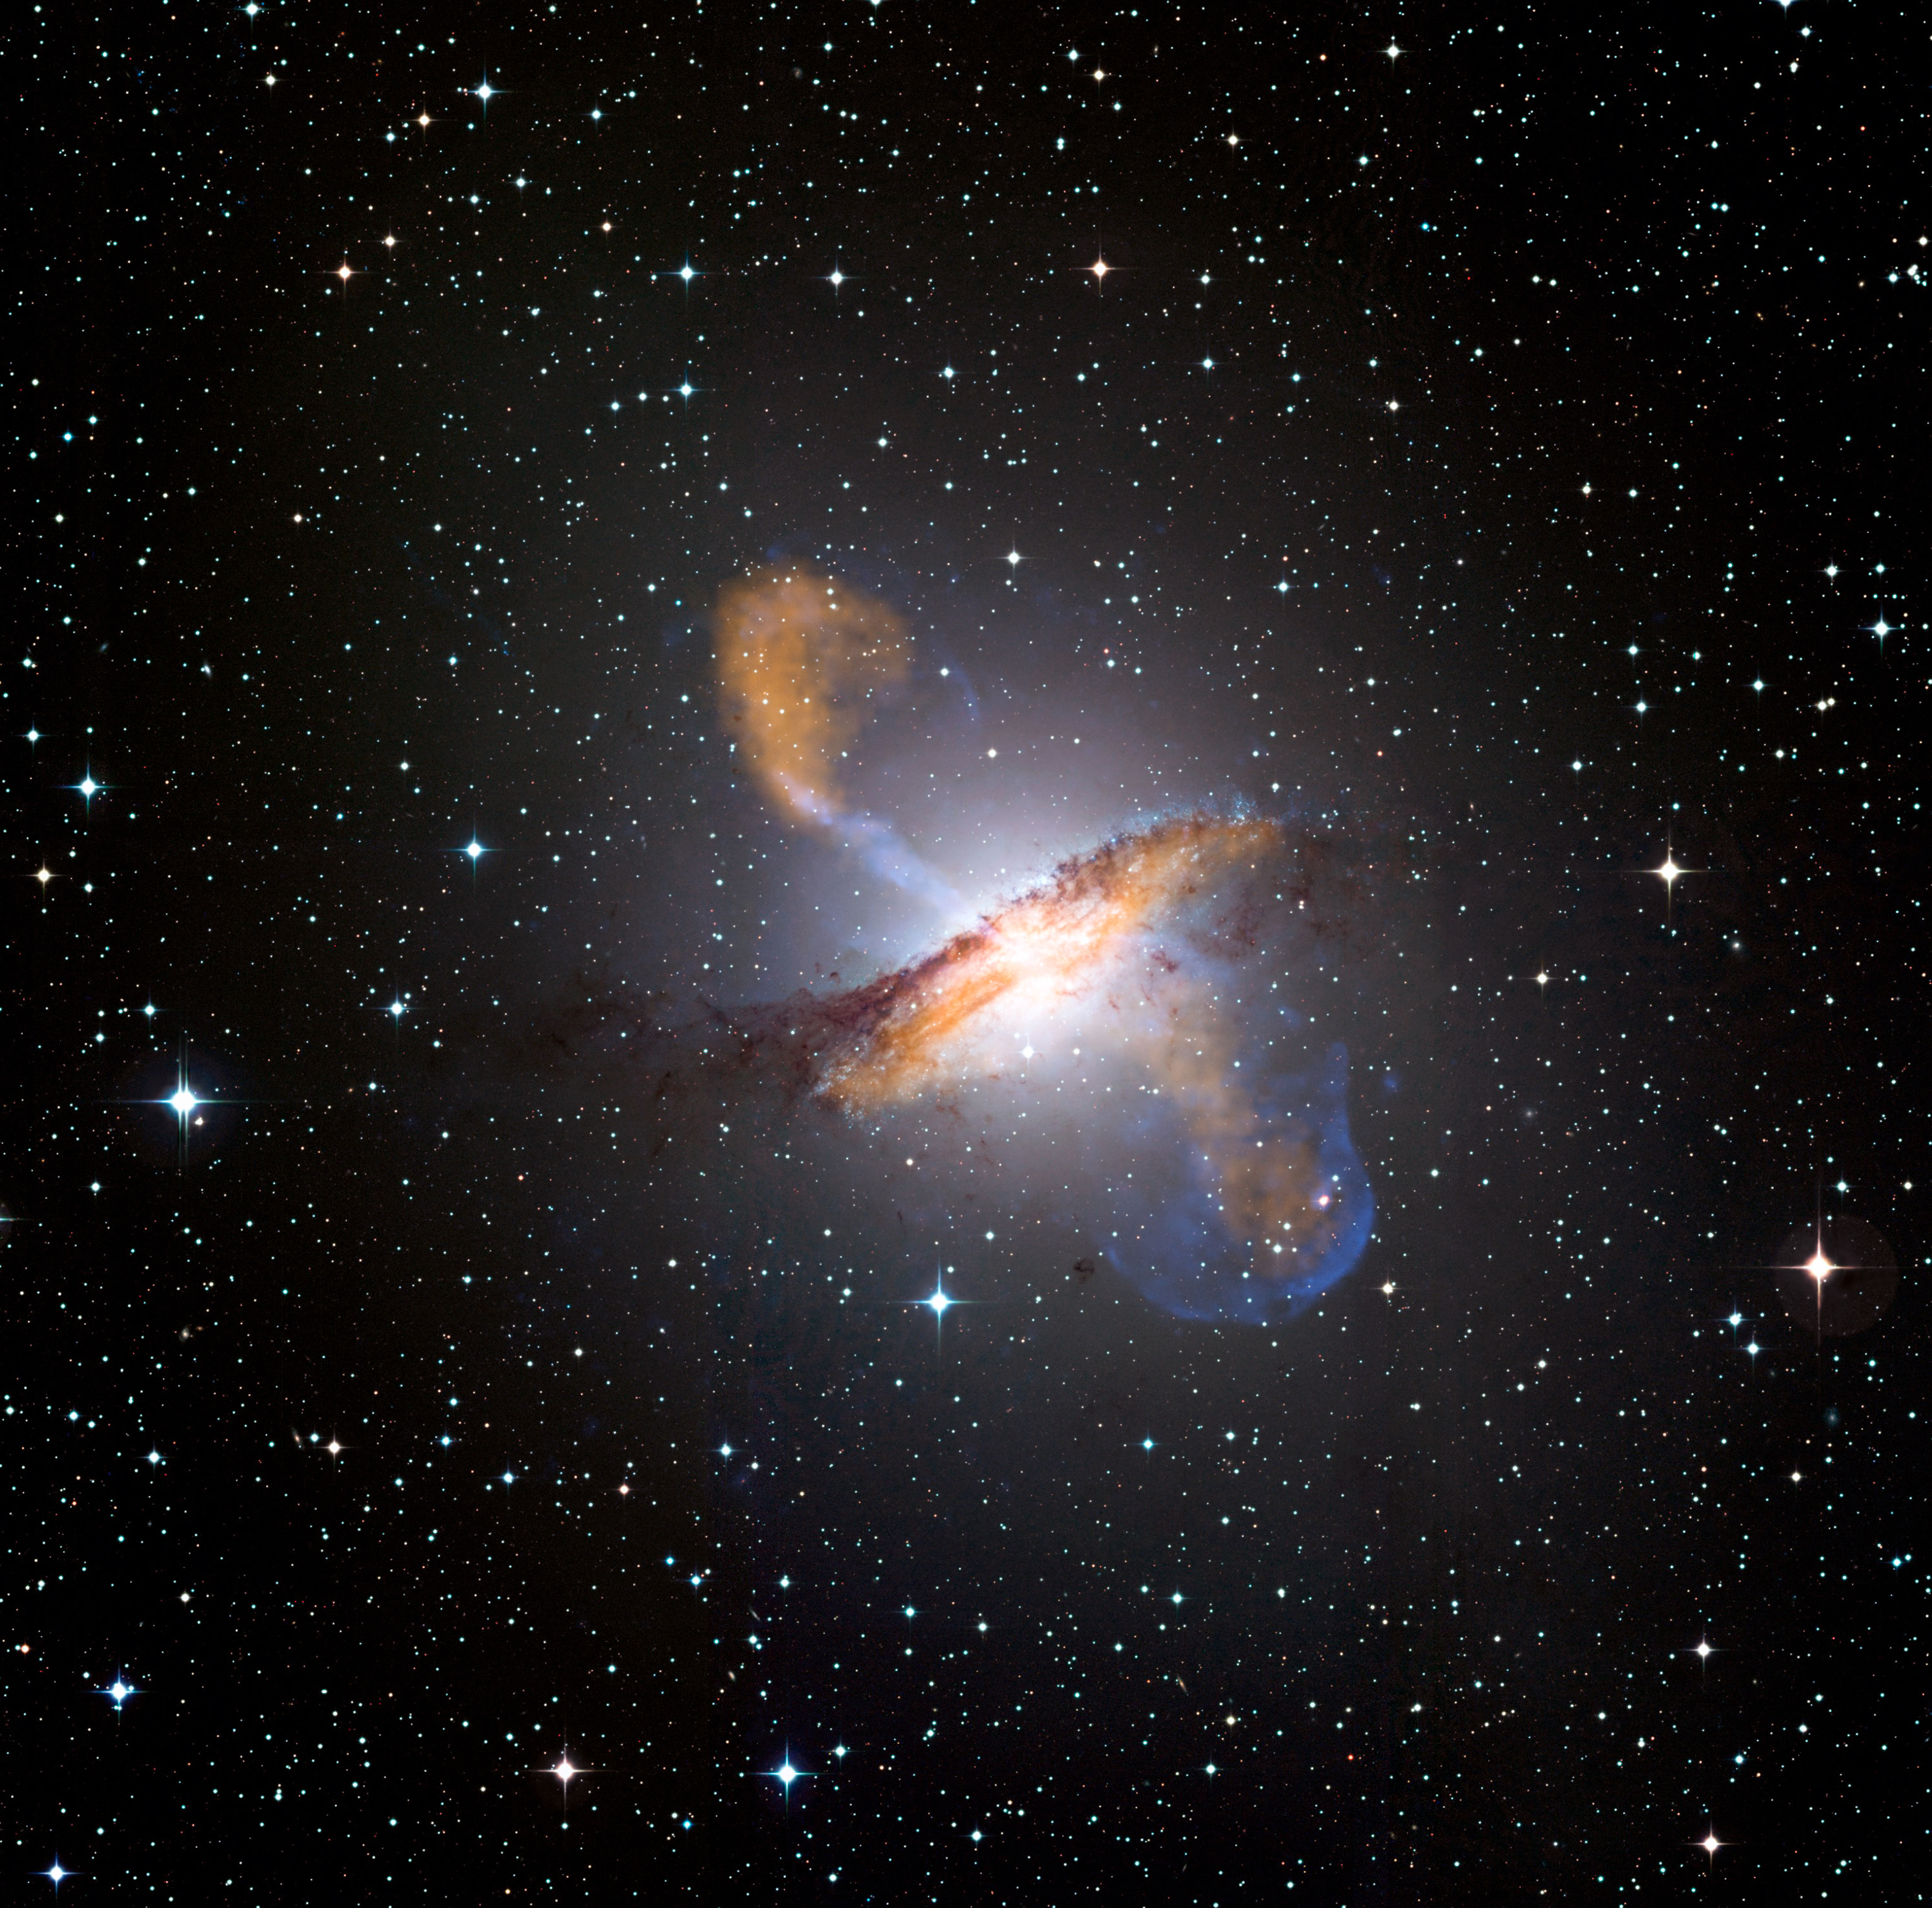 Don't get too close: A black hole in the galaxy Centaurus A emitting gas jets as it sucks in matter. (NASA NASA; Getty Images/Photo Researchers RM)